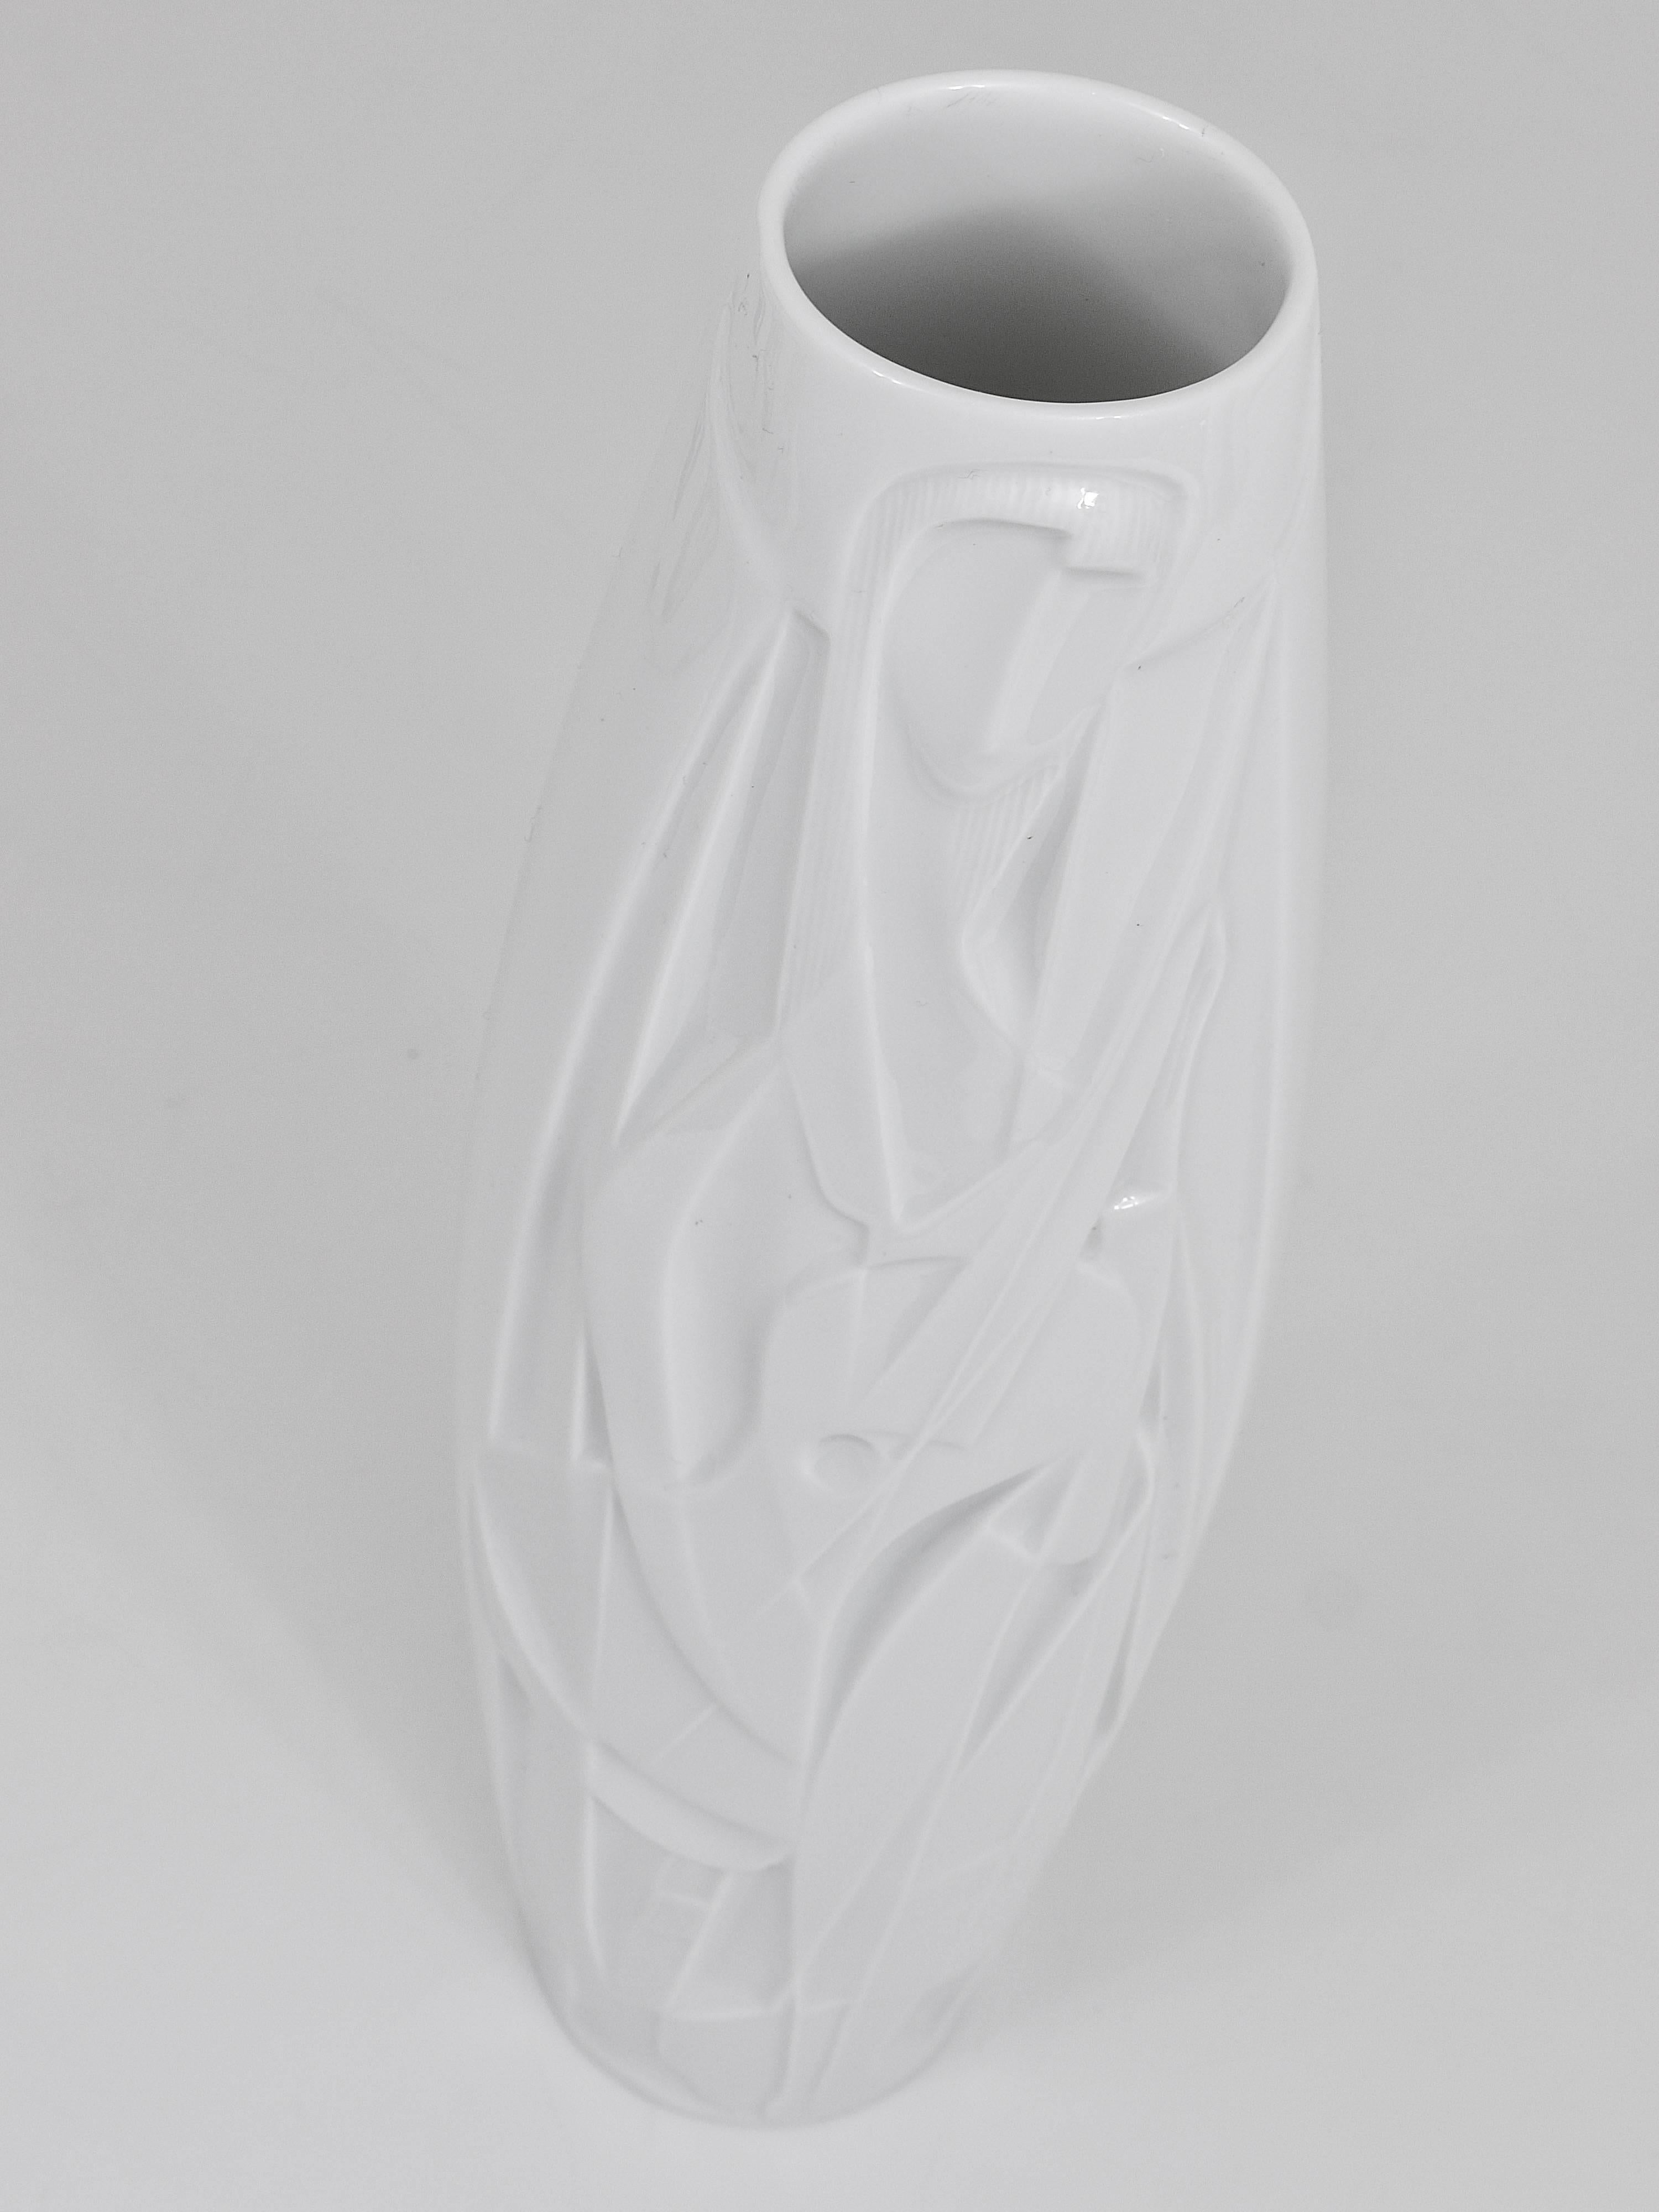 A beautiful white porcelain vase the lute player with shiny glaze from the 1960s, designed by Cuno Fischer, executed by Rosenthal Studio-Line, Germany. In very good condition.